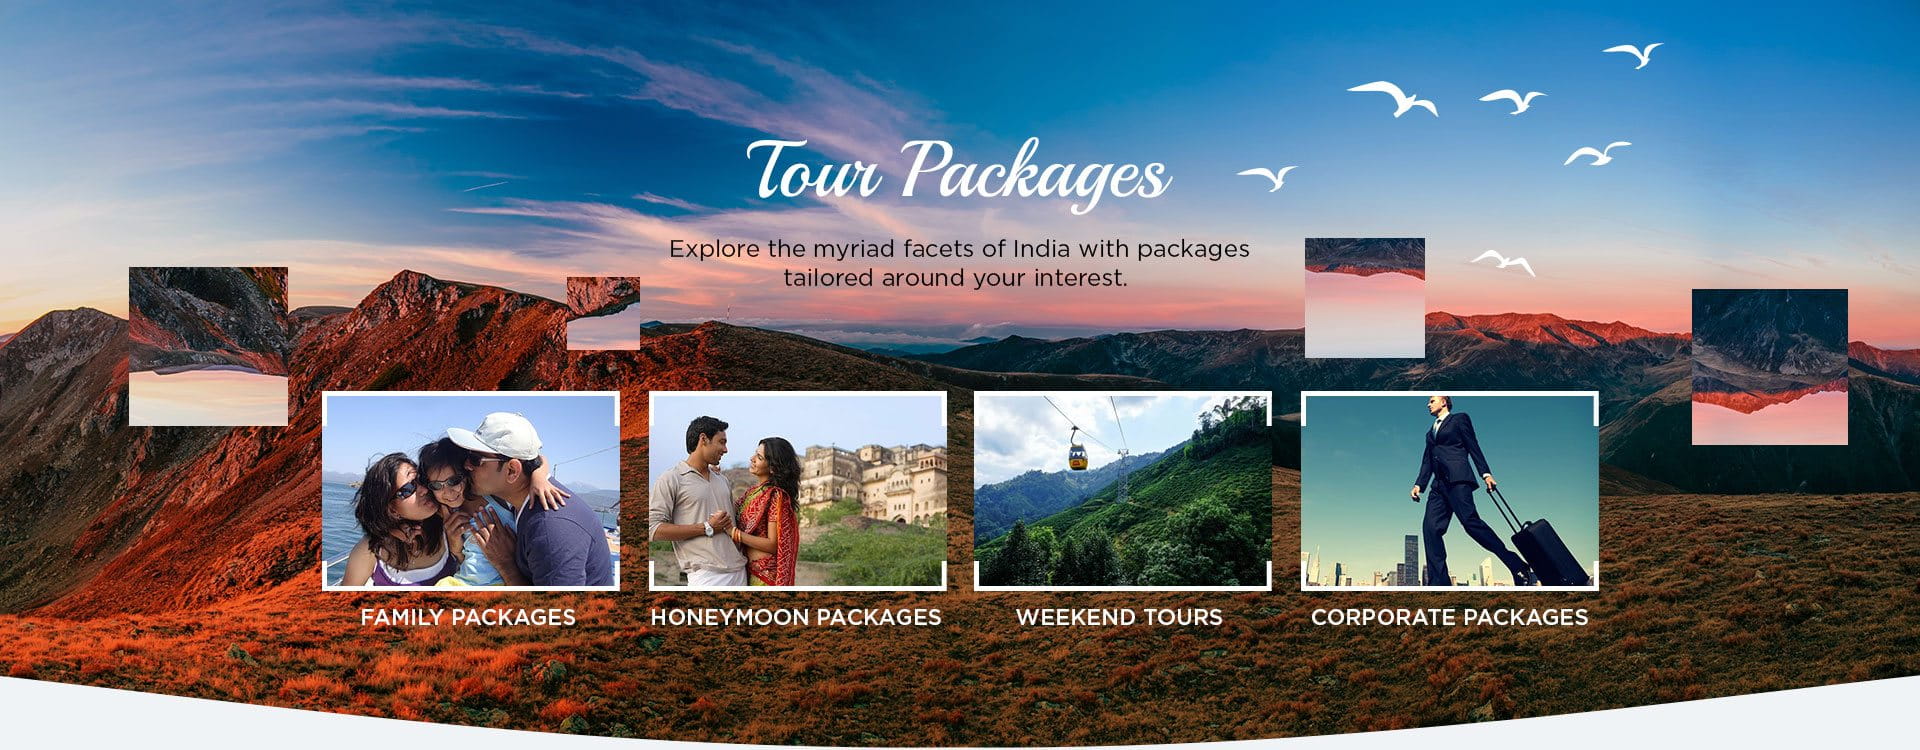 Tour Packages - Eastern Meadows Tour